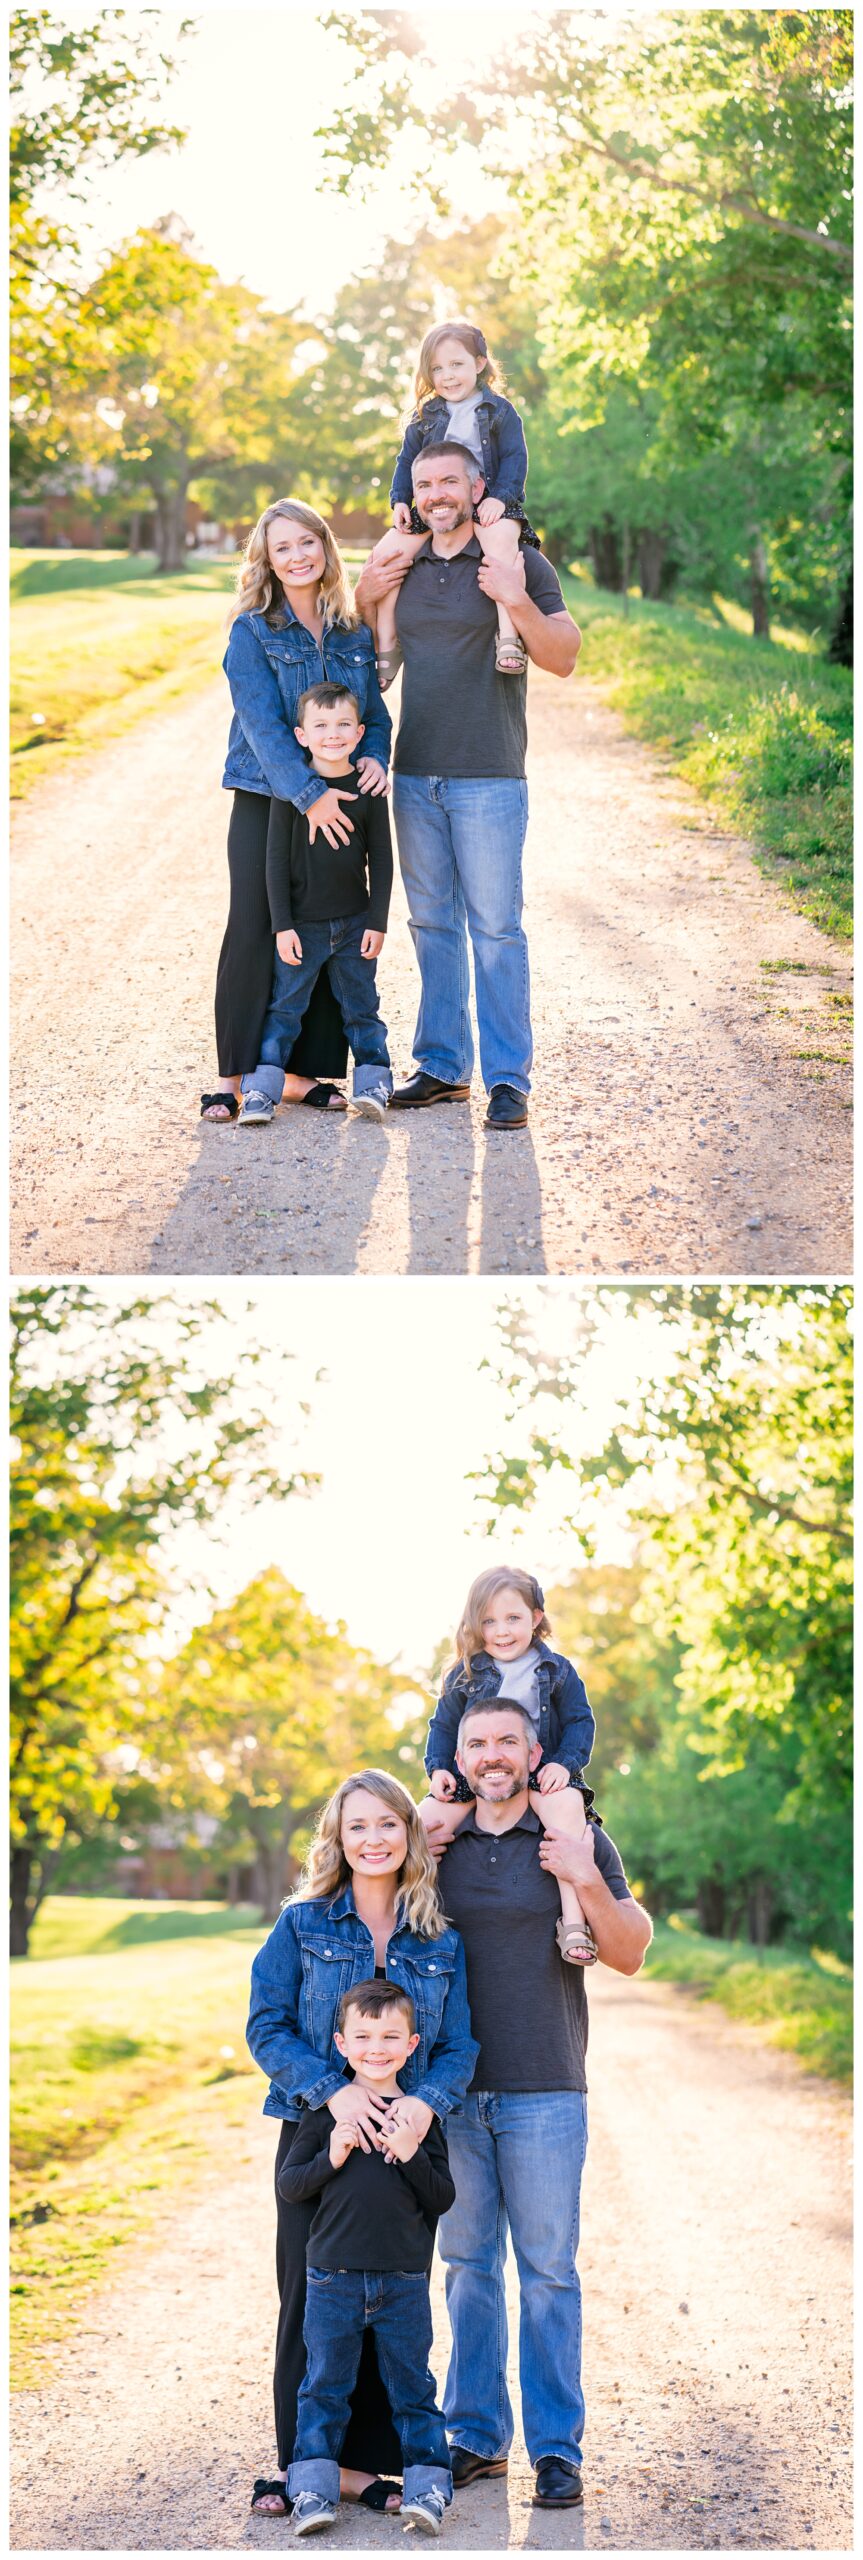 Family of four in the sunshine | Melissa Sheridan Photography